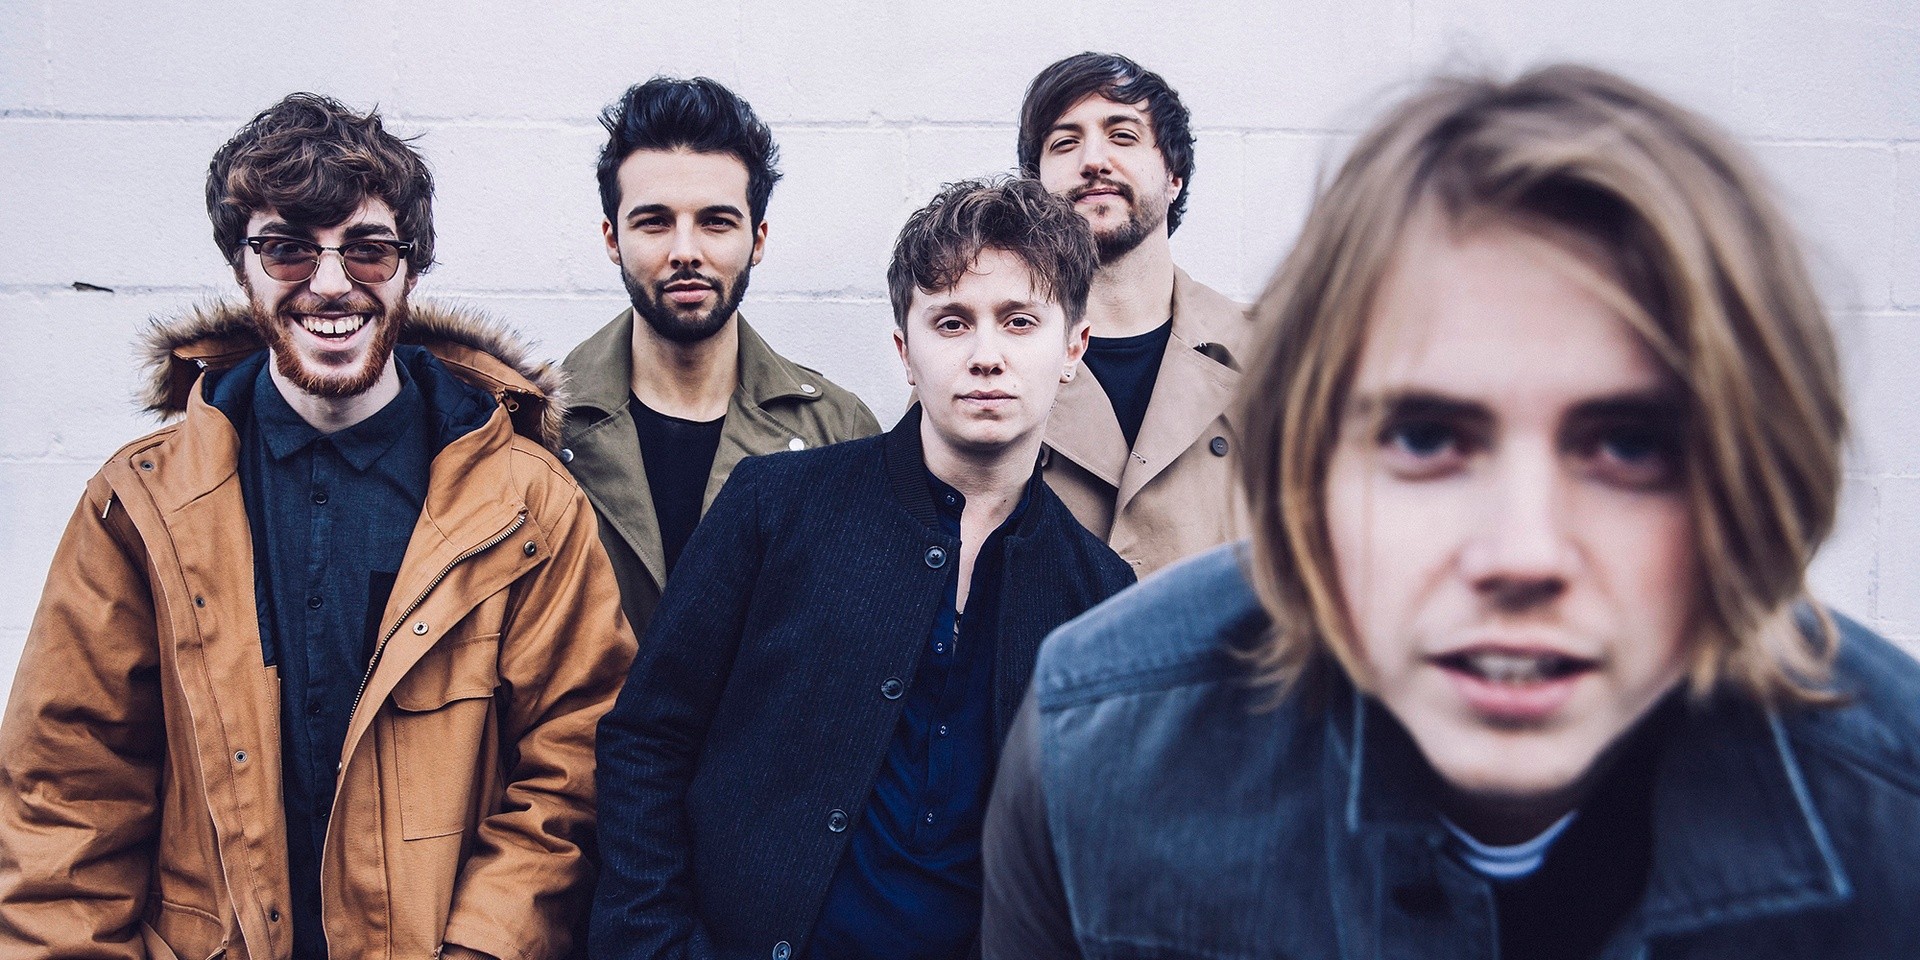 Emerging alt-rock band Nothing But Thieves to perform in Singapore